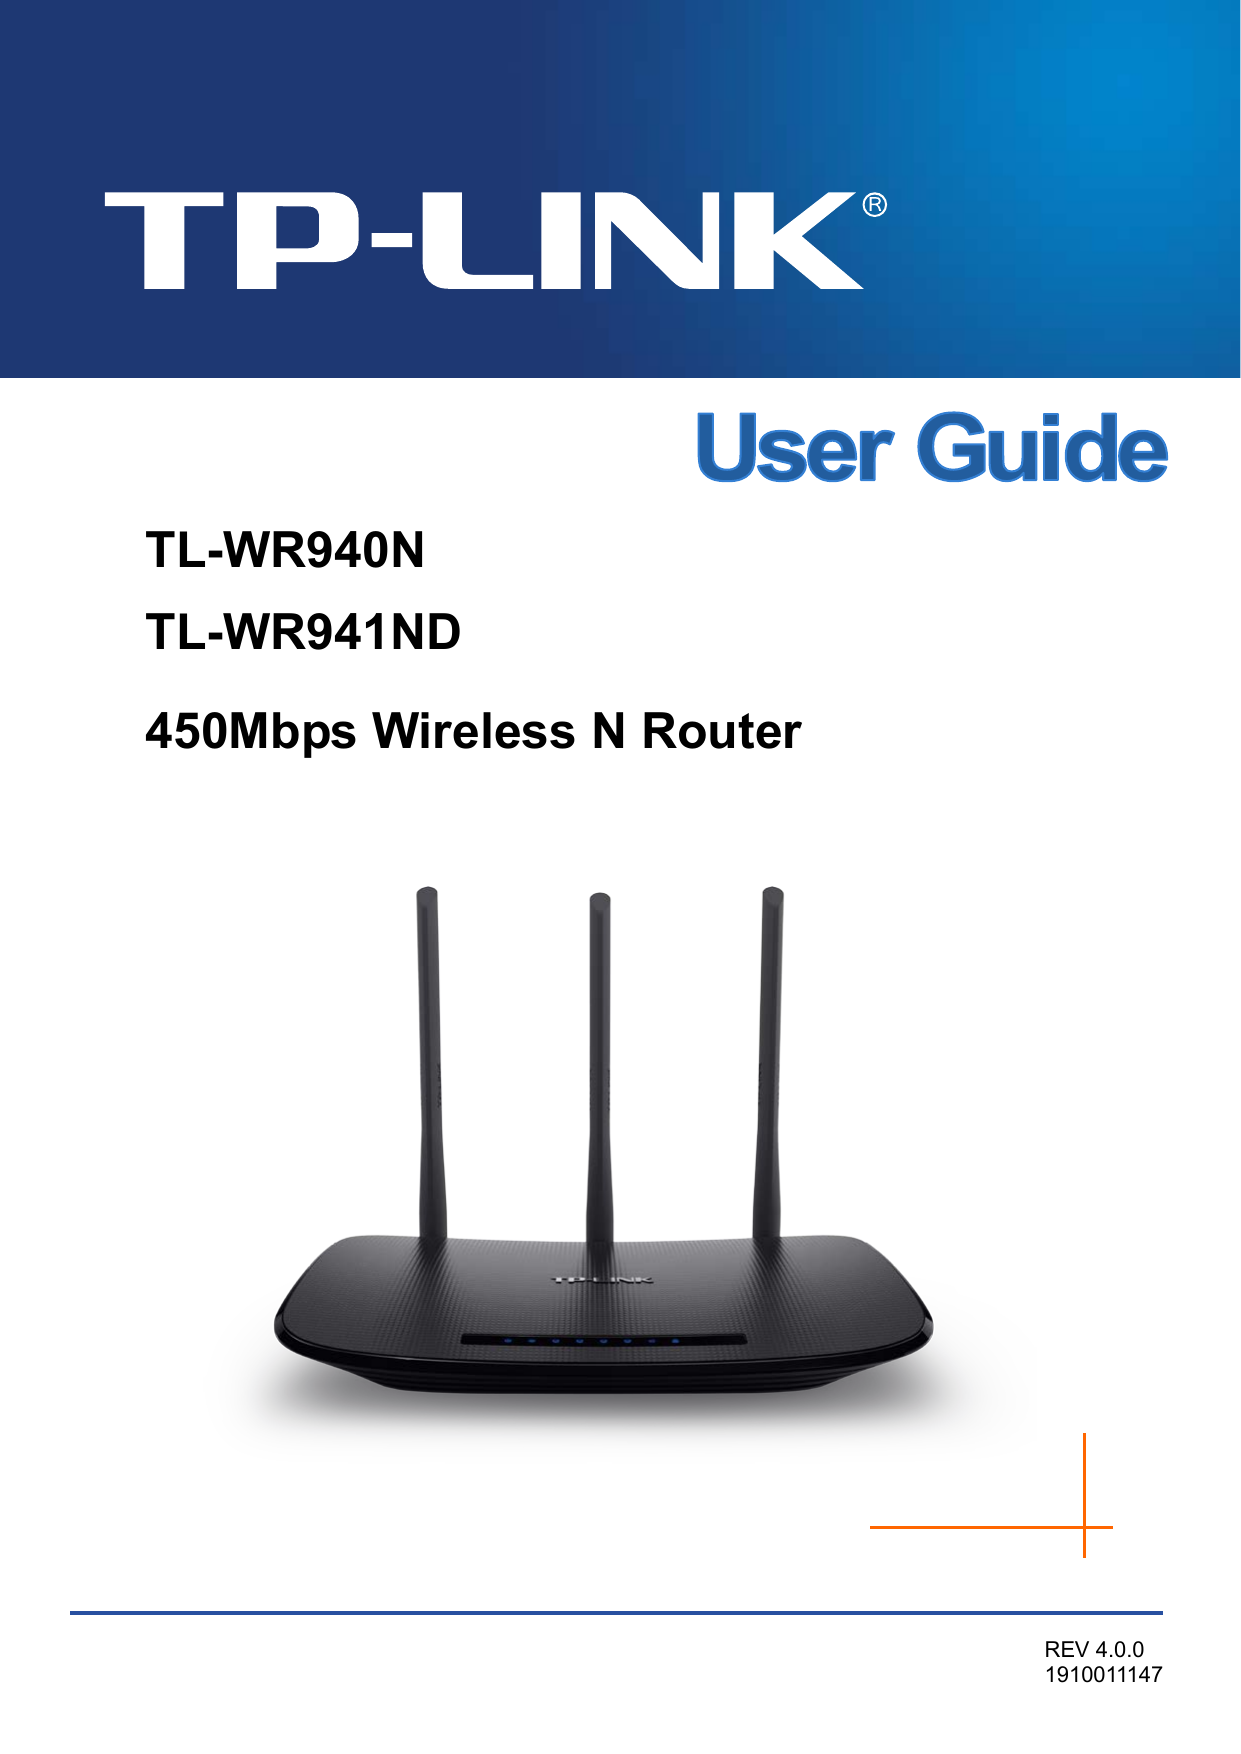   TL-WR940N TL-WR941ND 450Mbps Wireless N Router  REV 4.0.0 1910011147  